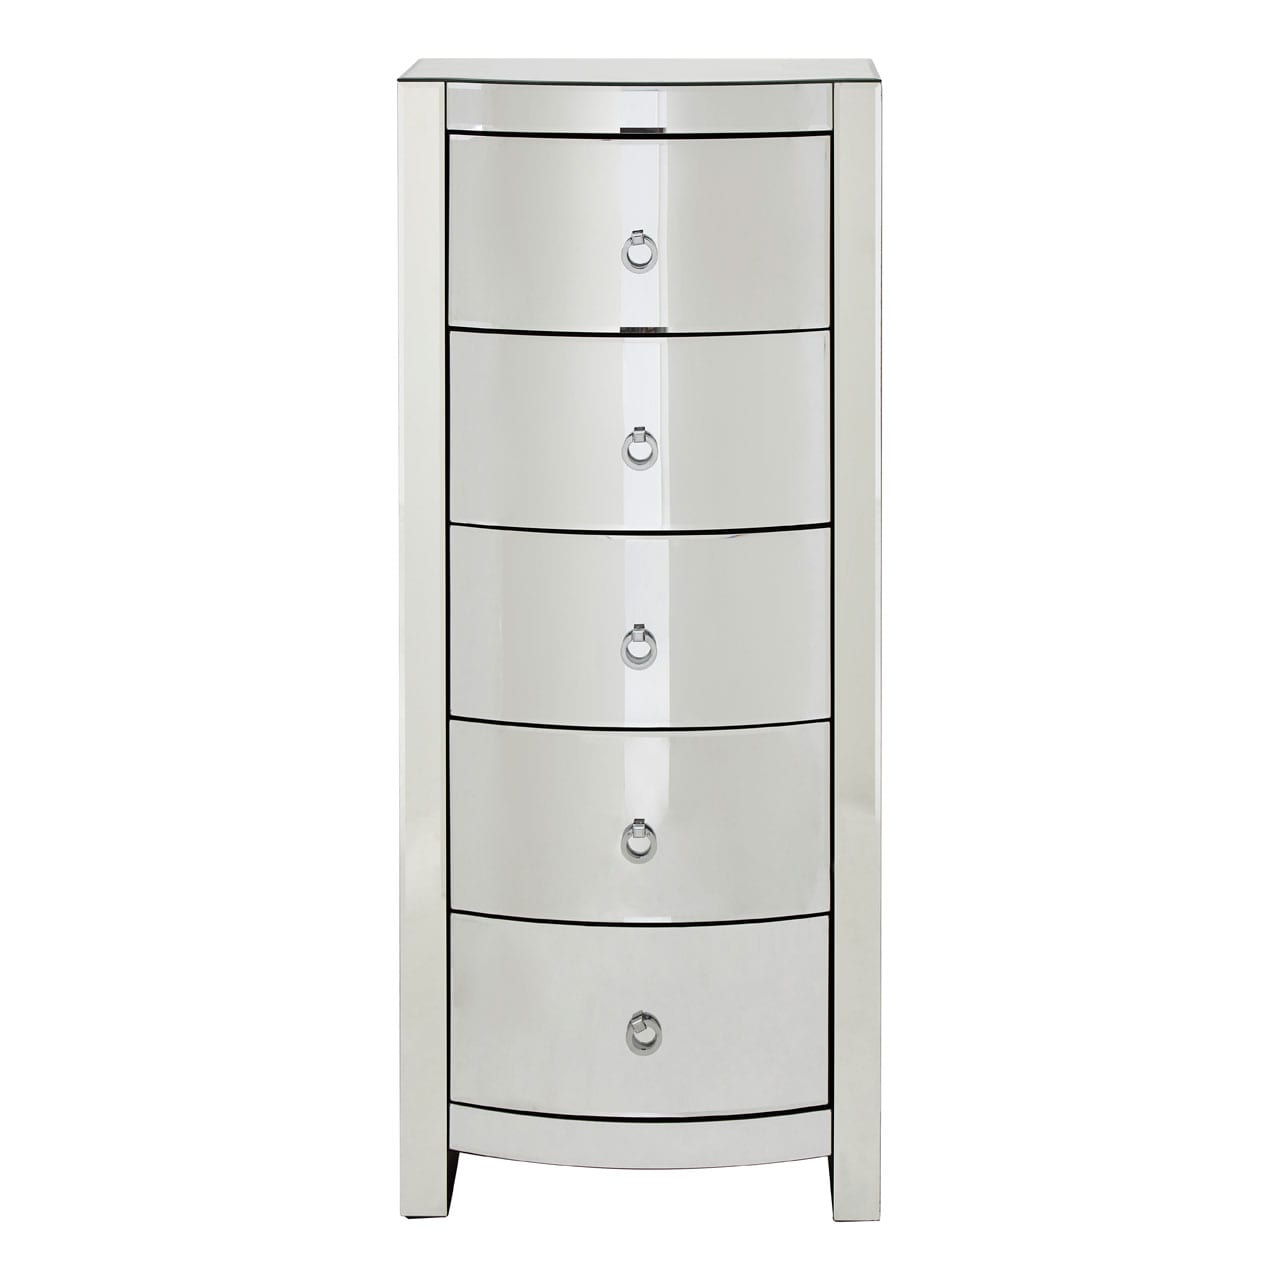 Veneto Curved Tall Boy Drawers The Haven Home Interiors